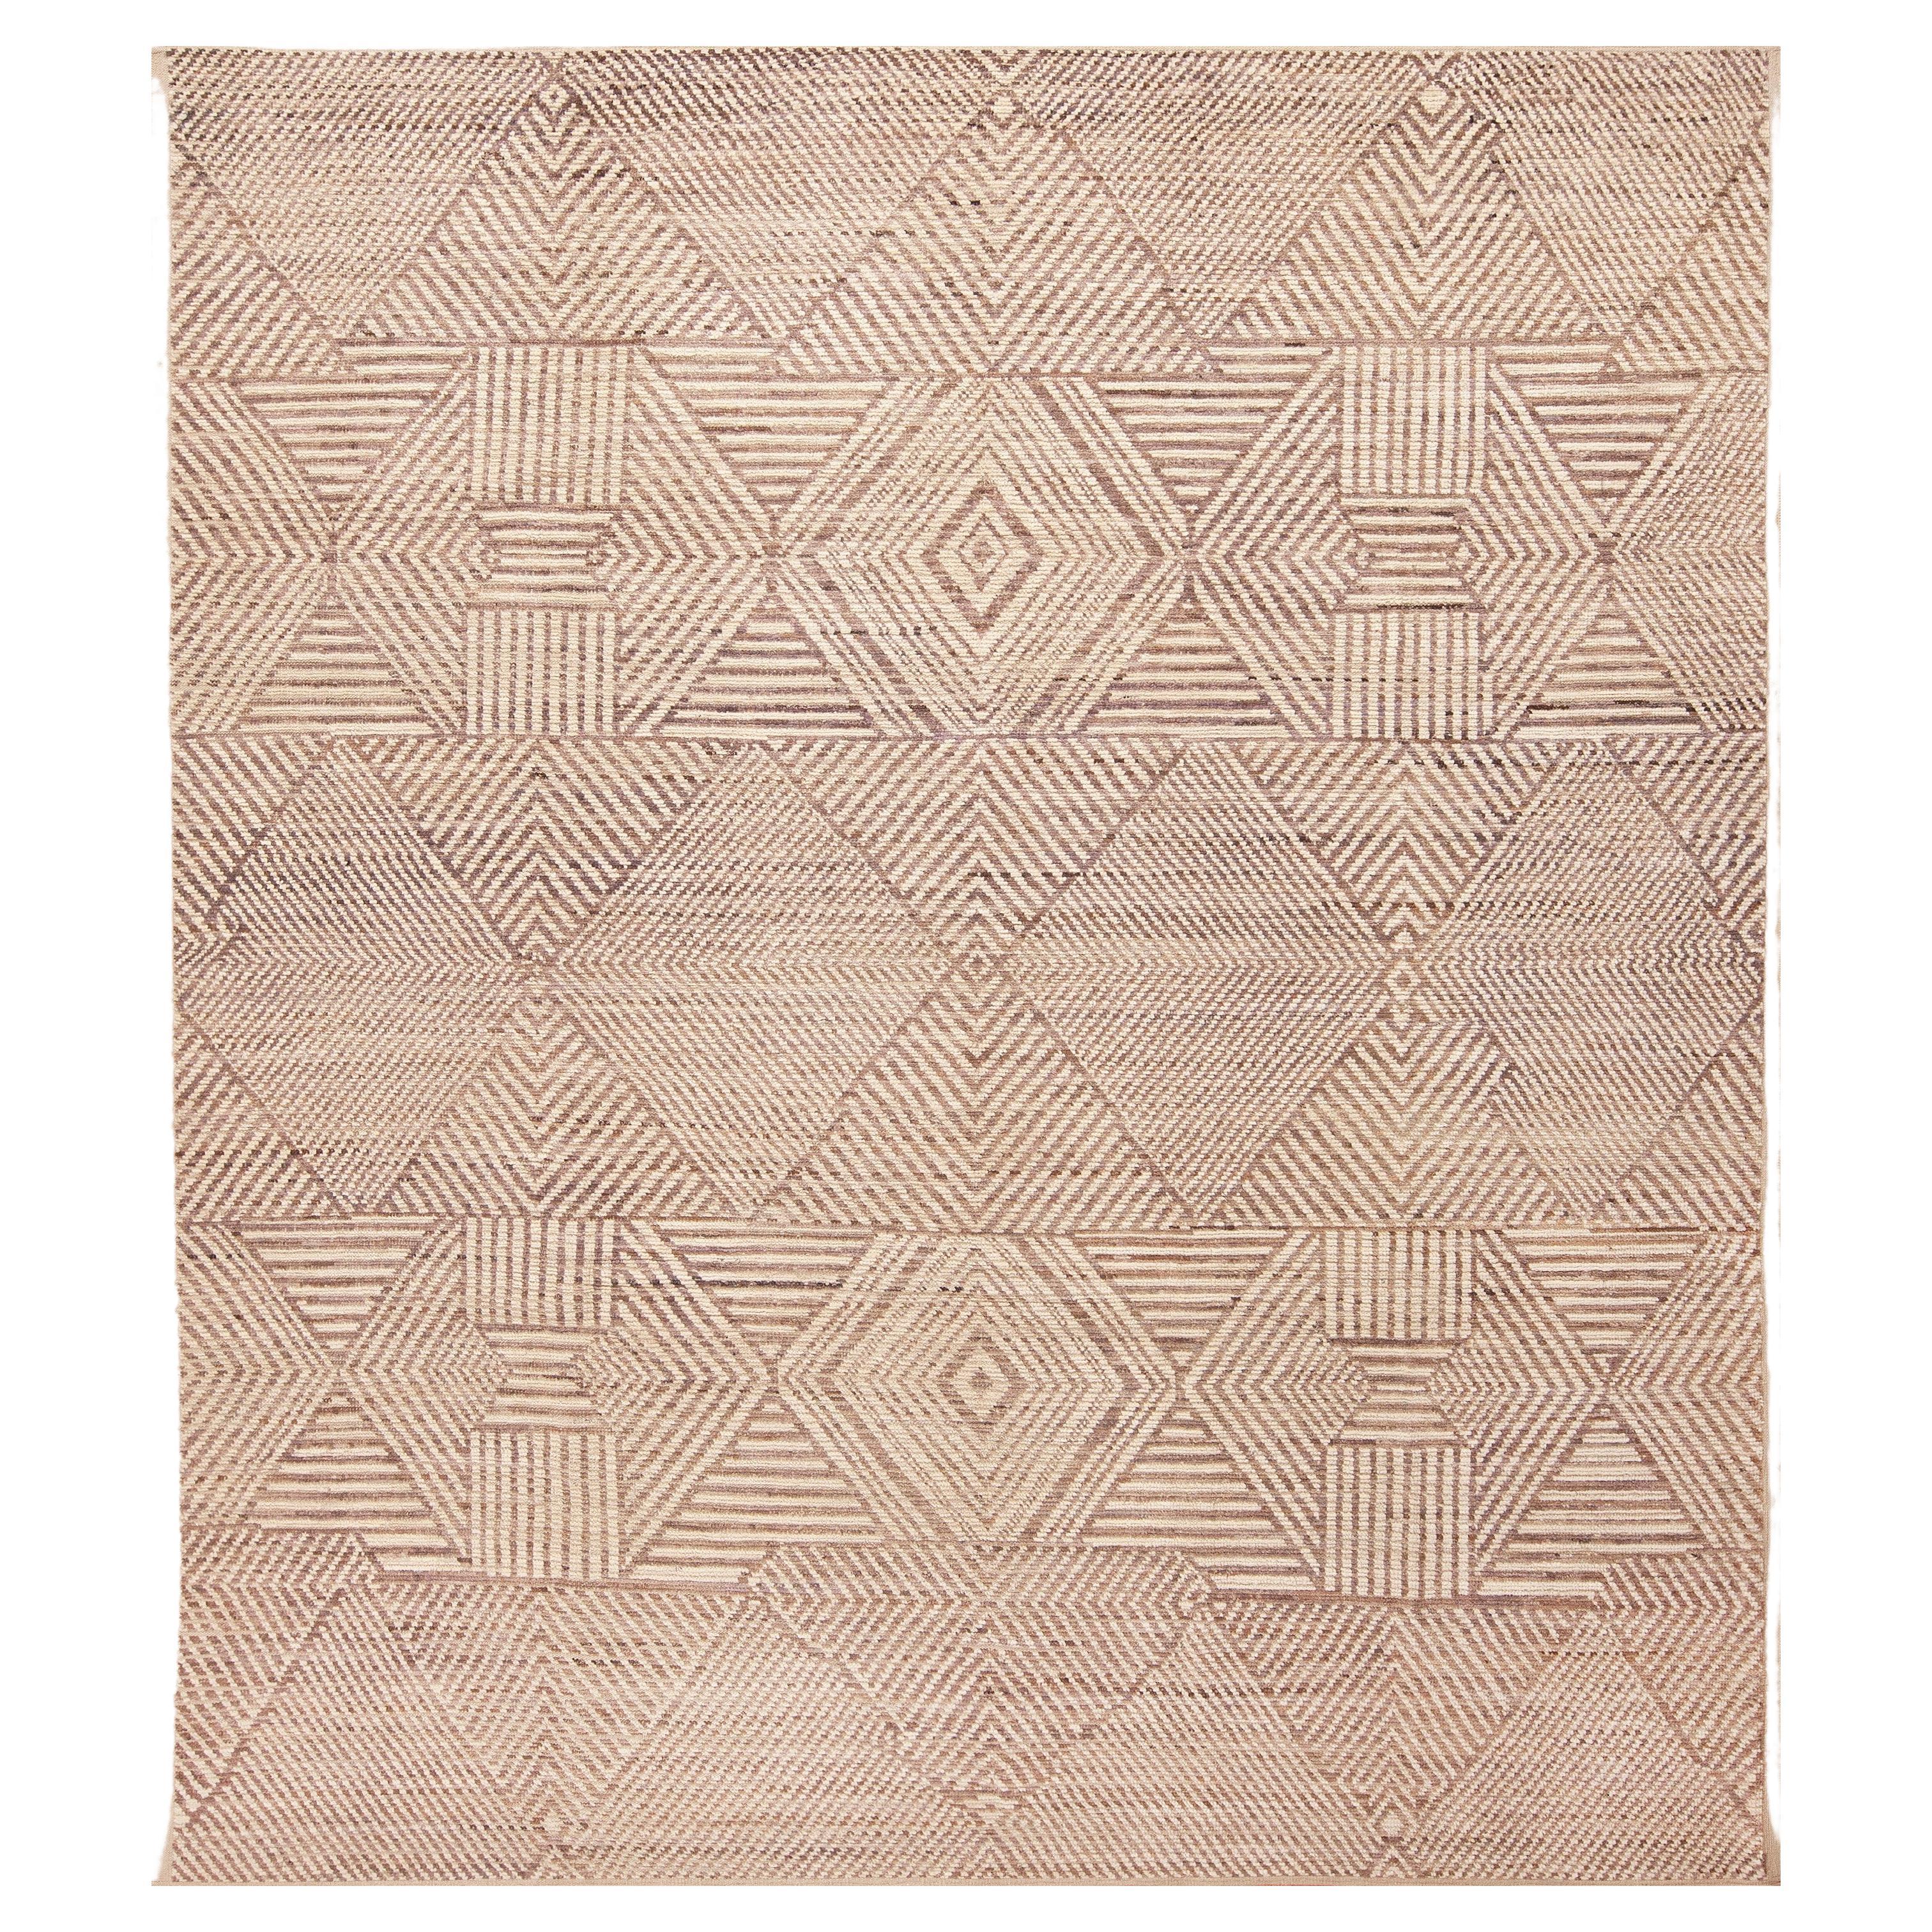 Nazmiyal Collection North African Inspired Modern Geometric Neutral Rug 9' x 10'